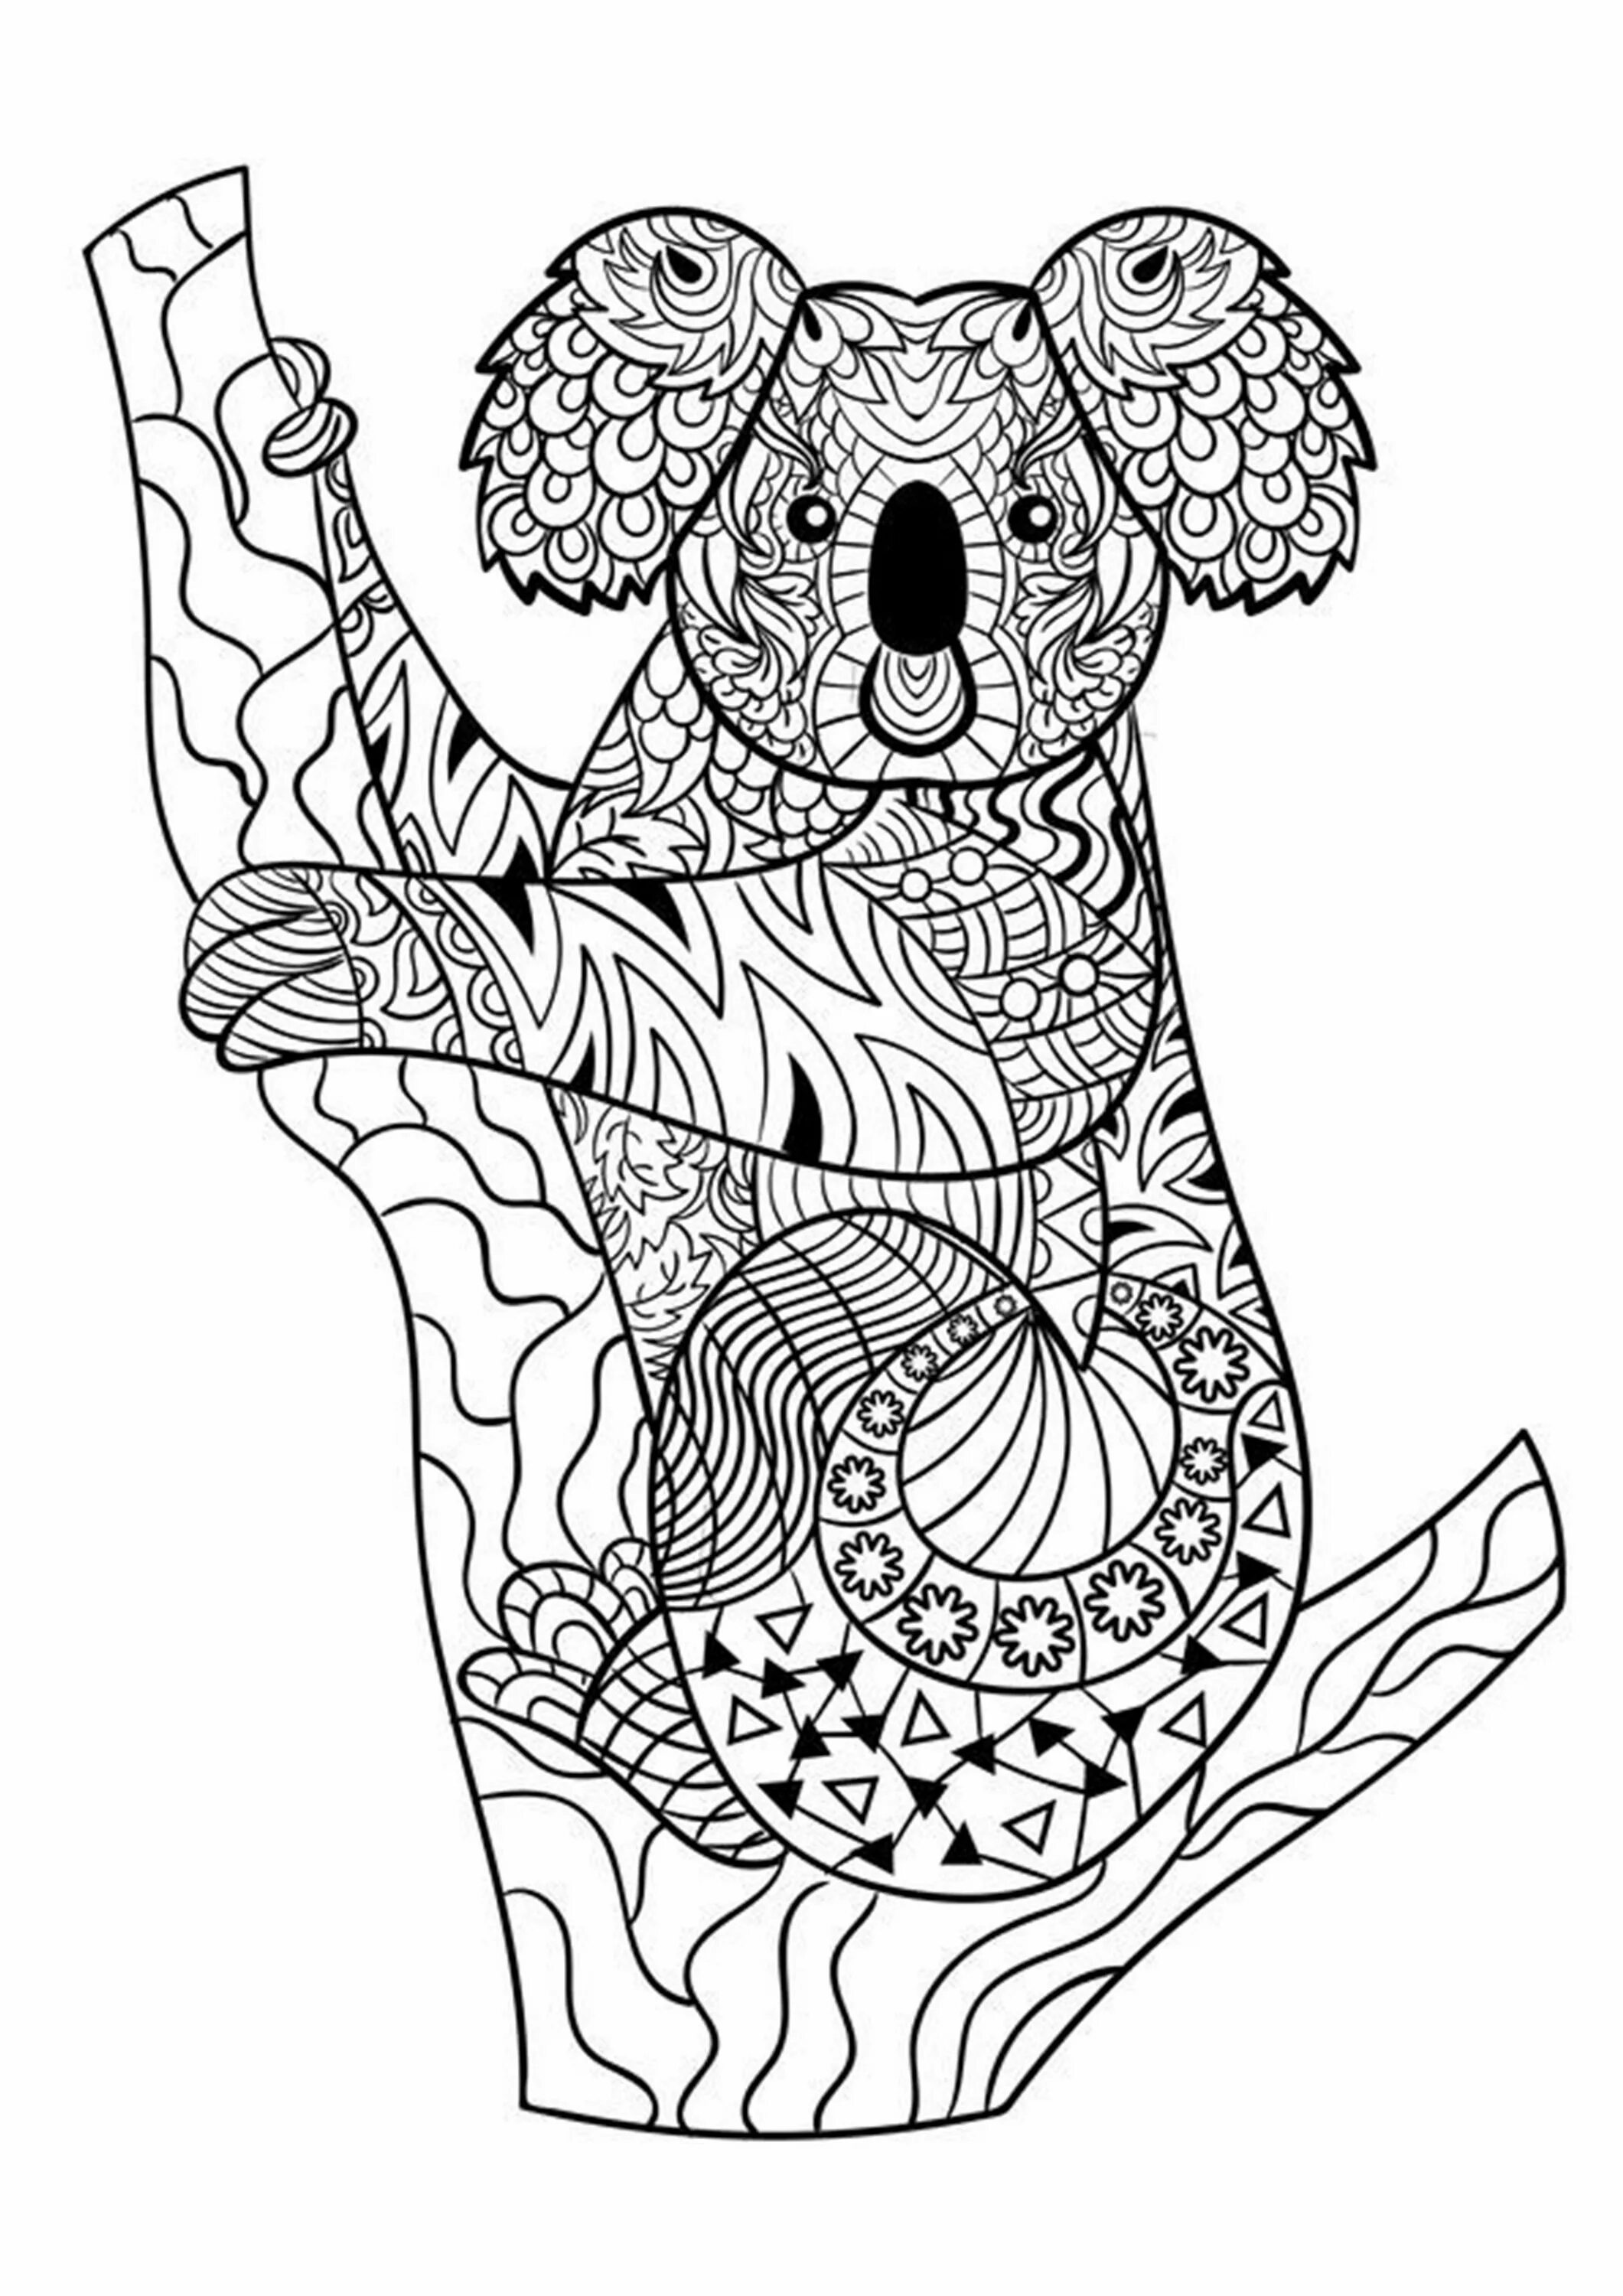 Great animal coloring pages for adults